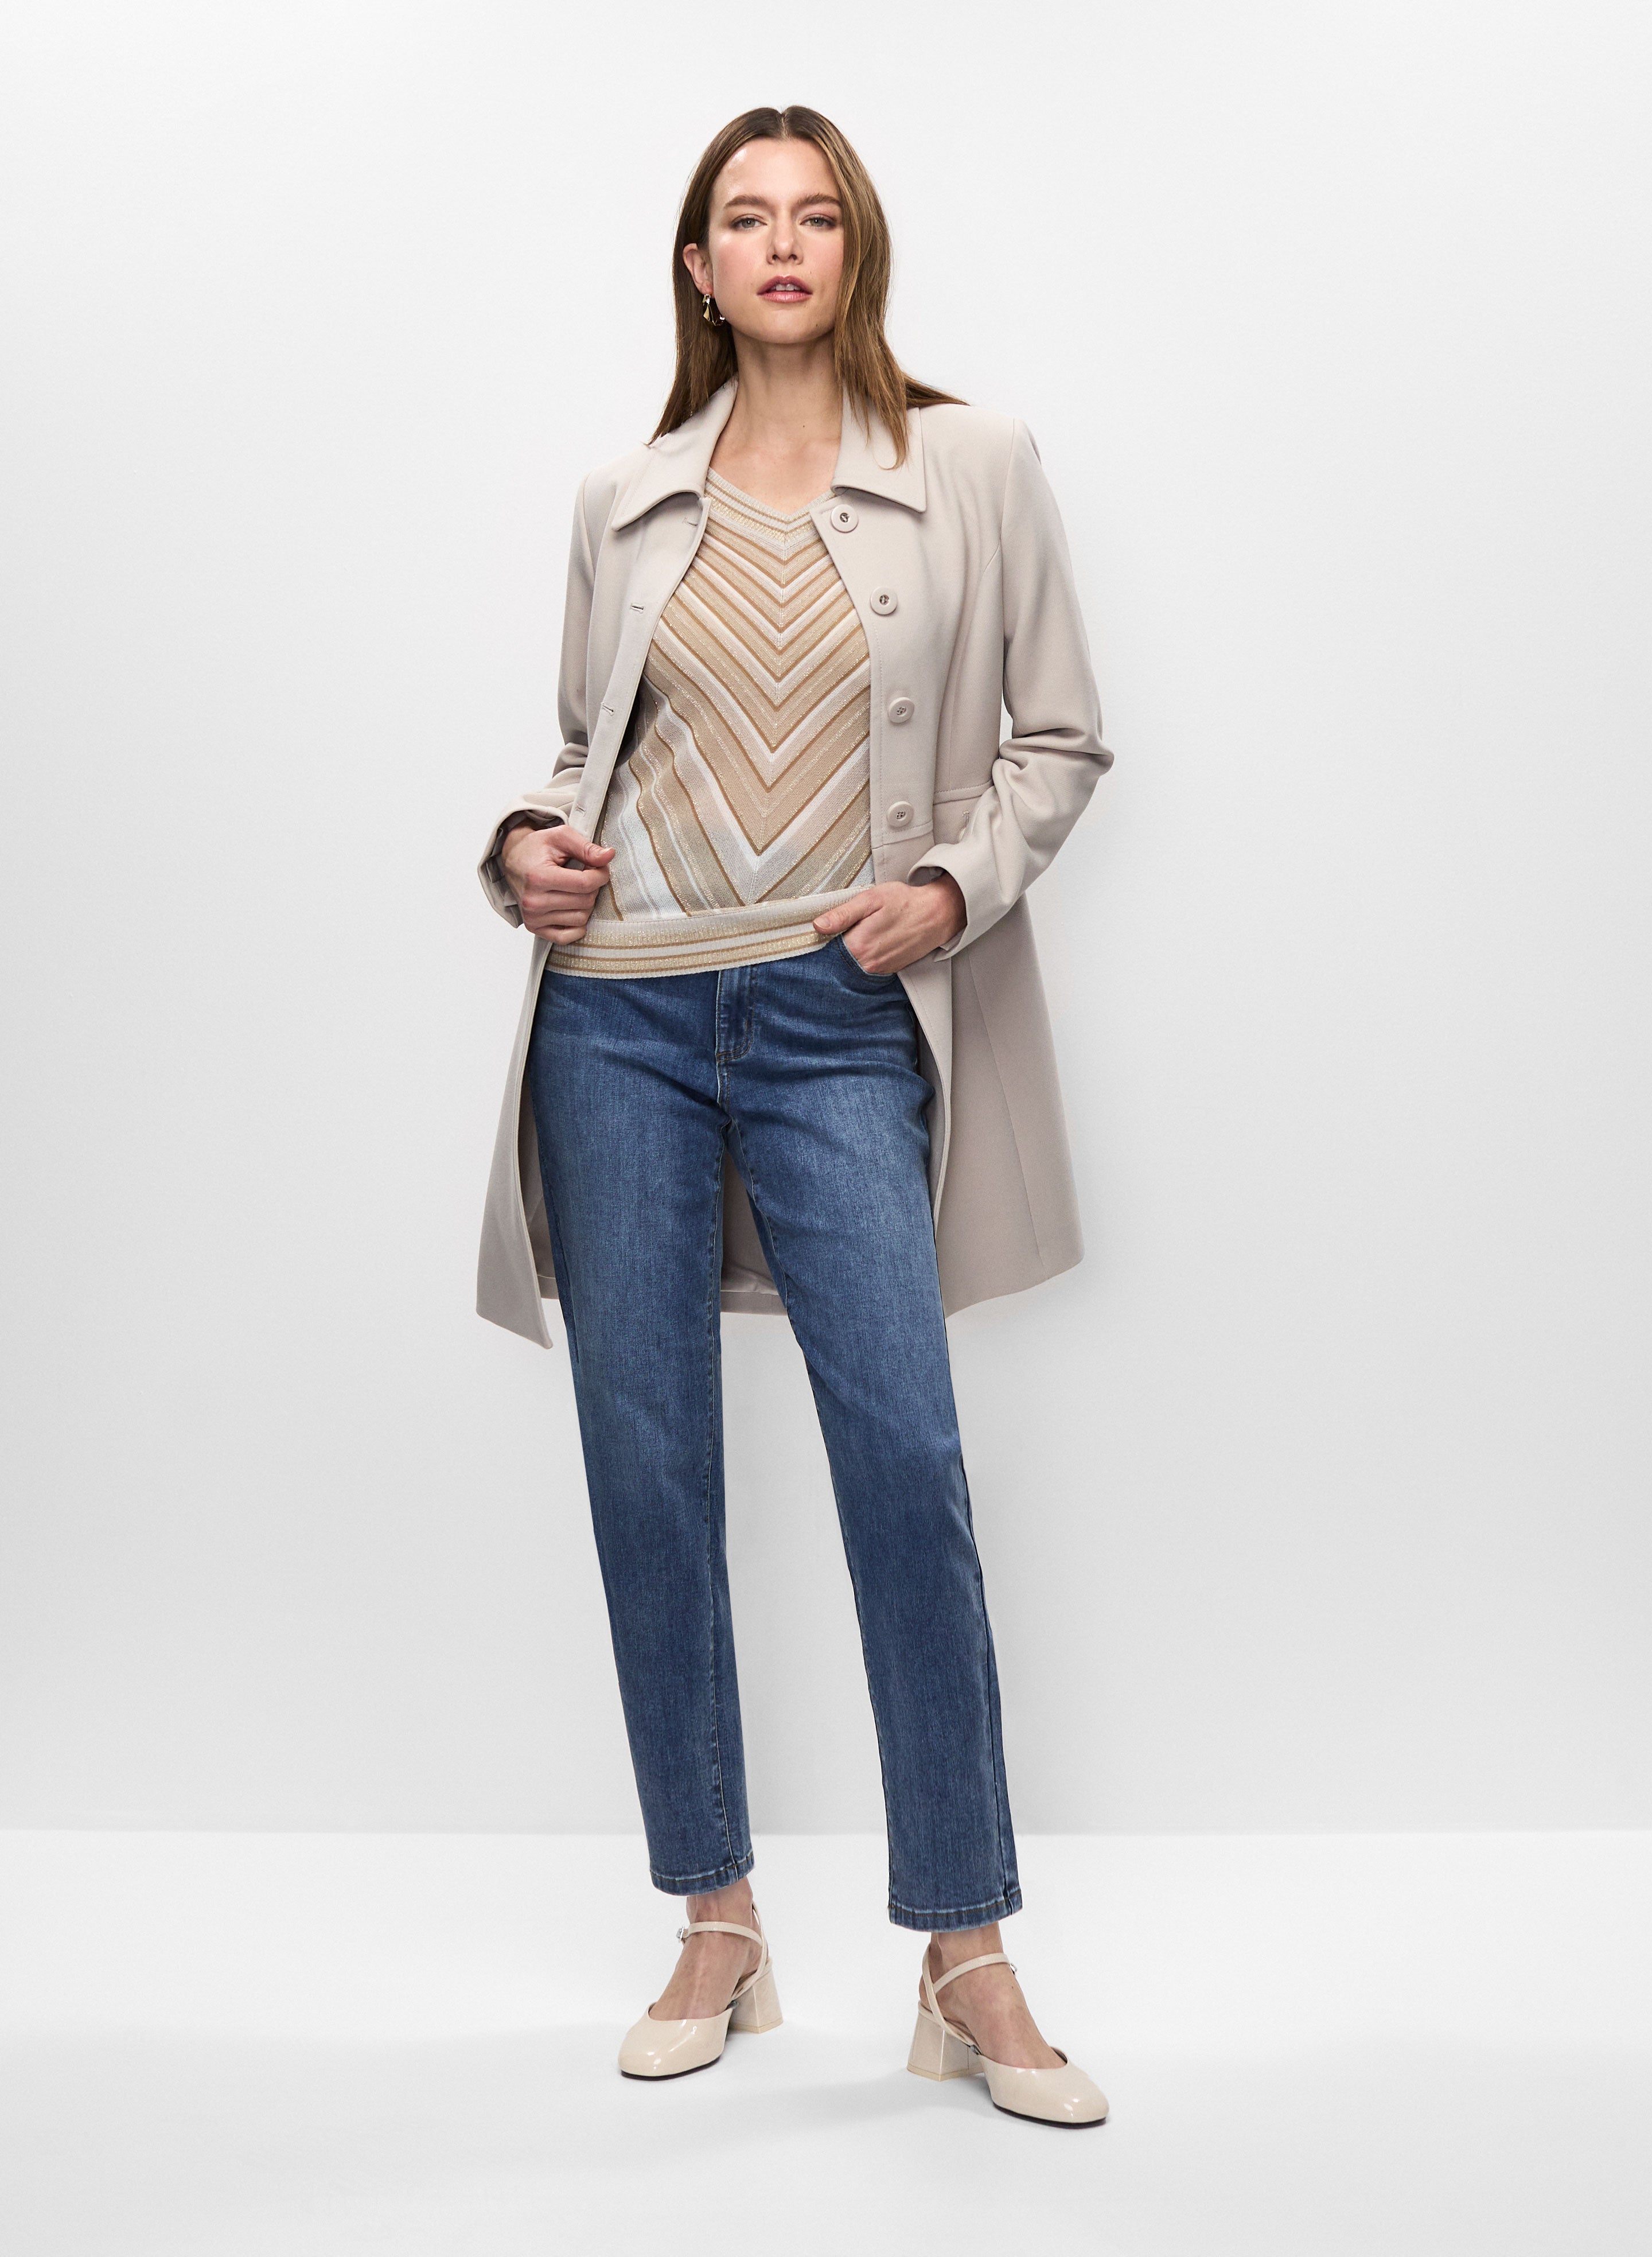 Tricotine Trench, Striped Knit & Straight Leg Jeans